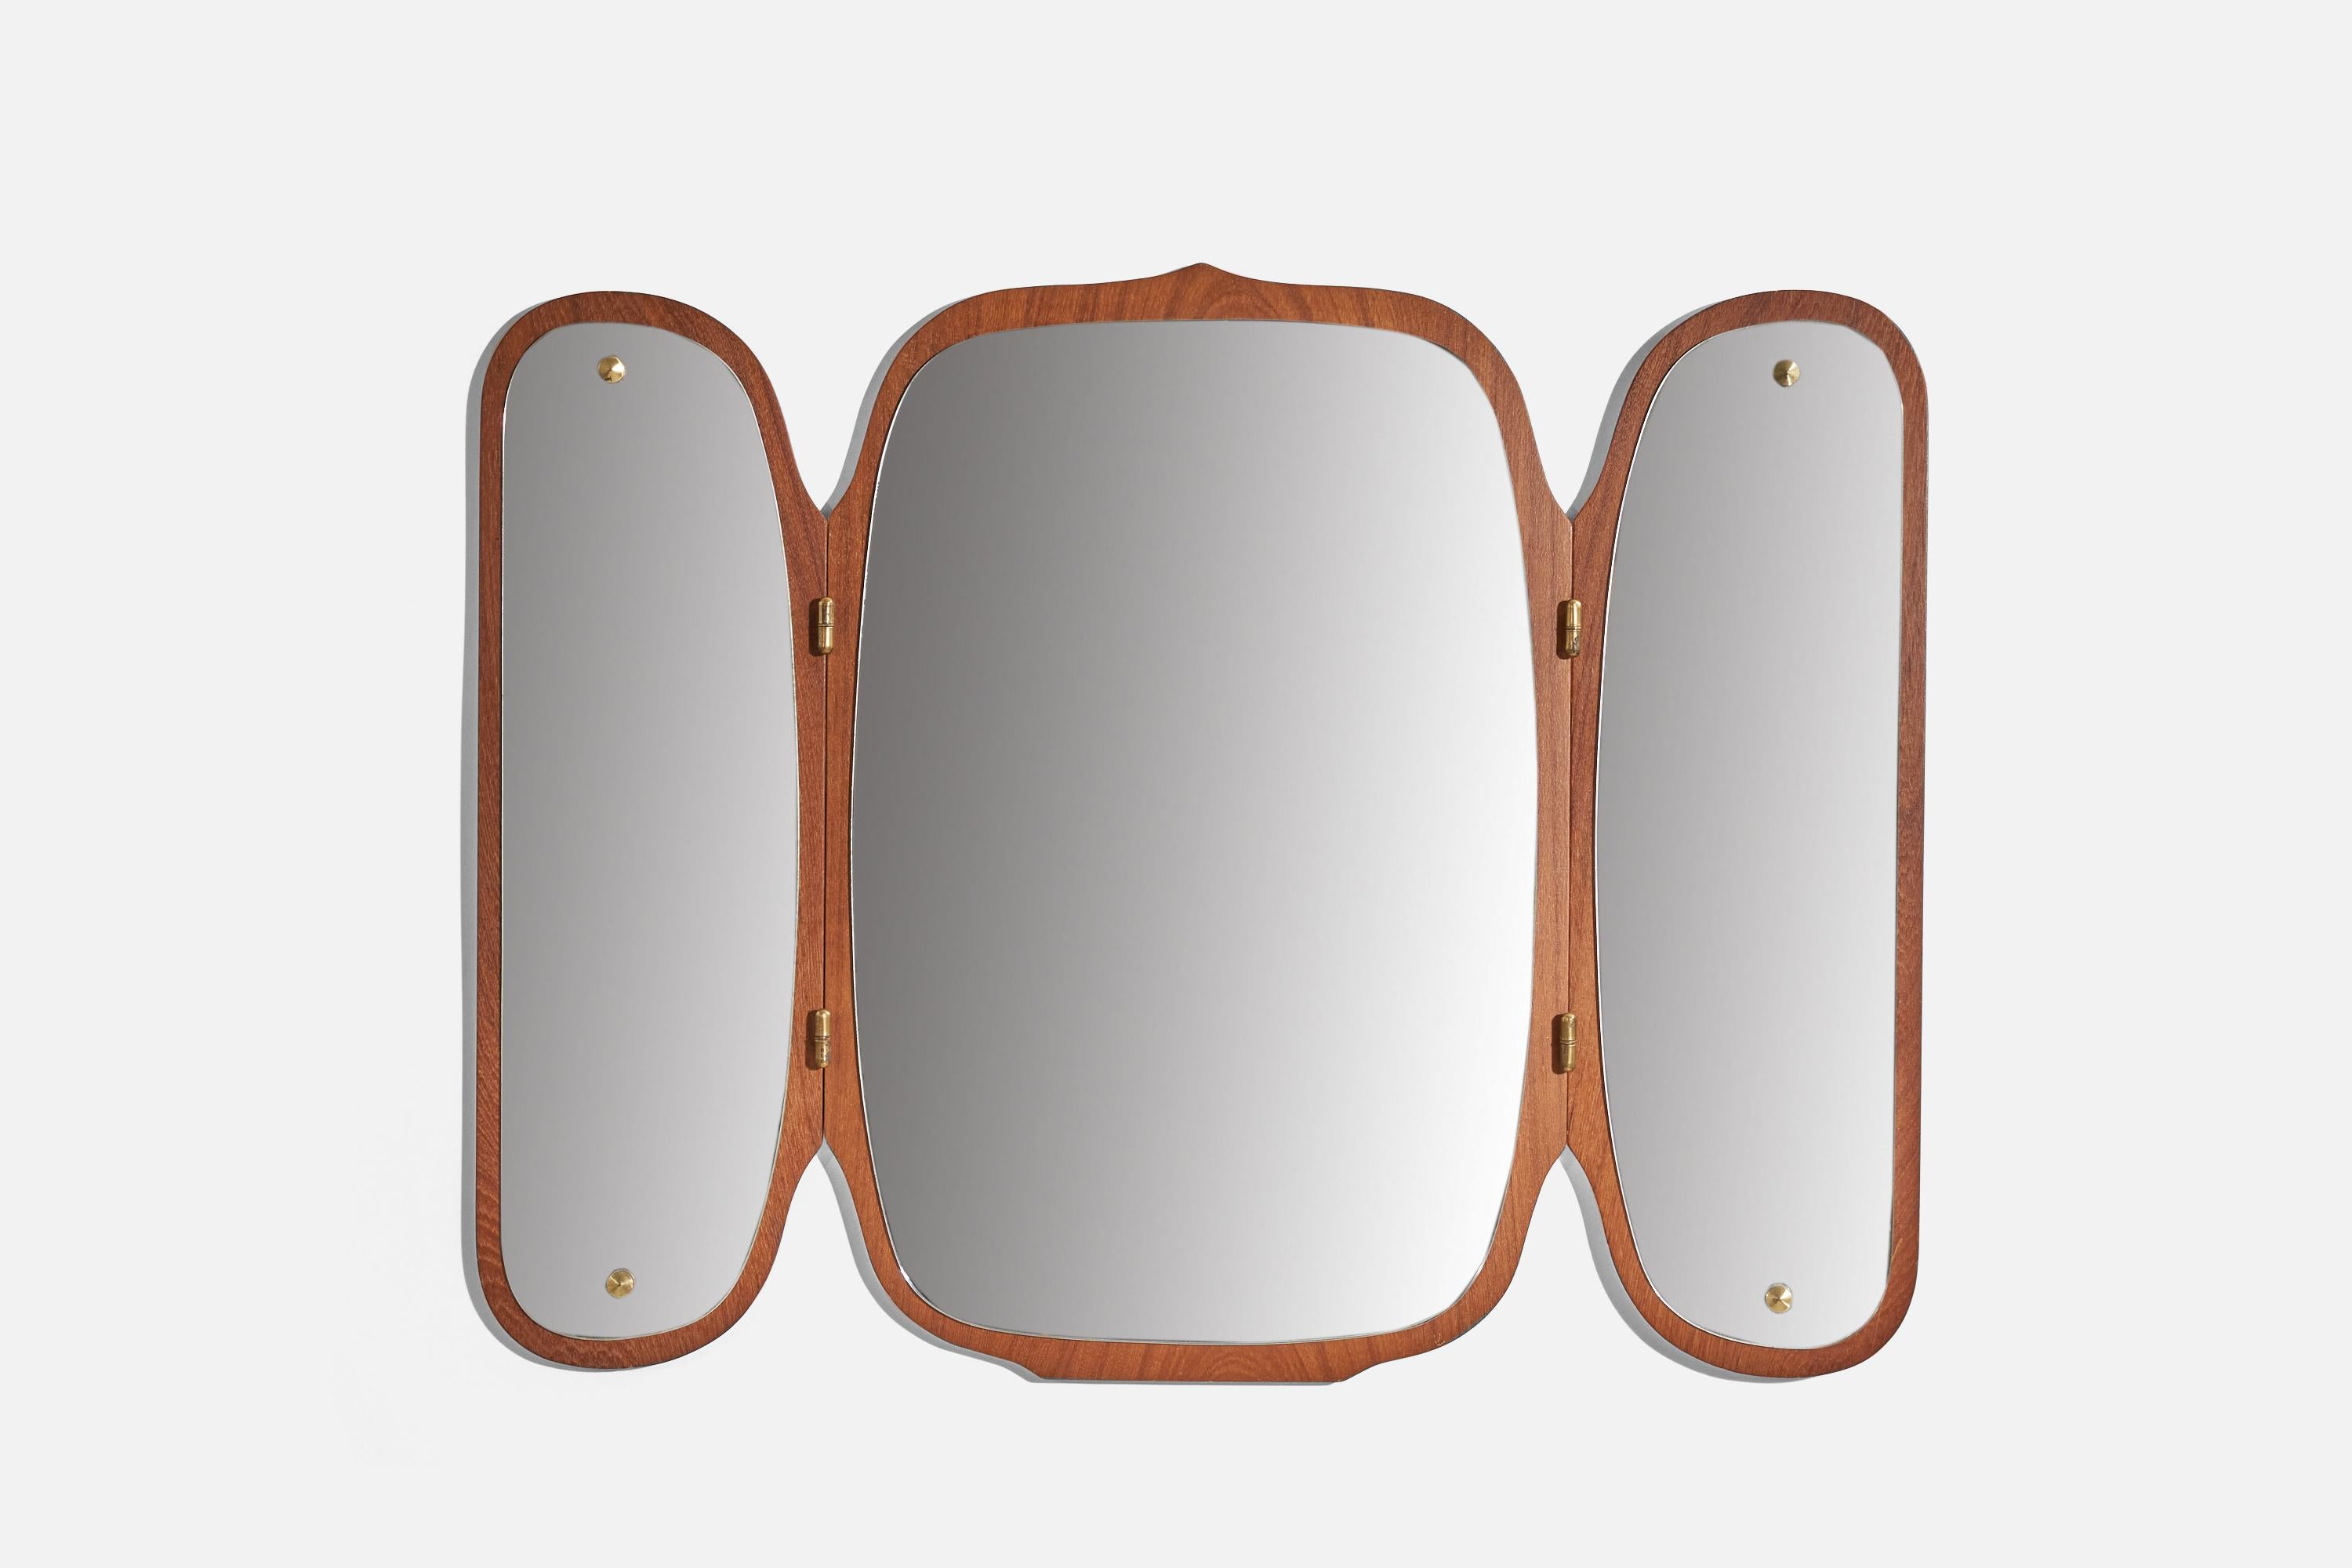 An adjustable teak wall mirror designed and produced by Eriksmålaglas, Eriksmåla, Sweden, 1950s. 
Executed in three joined parts that are adjustable.

